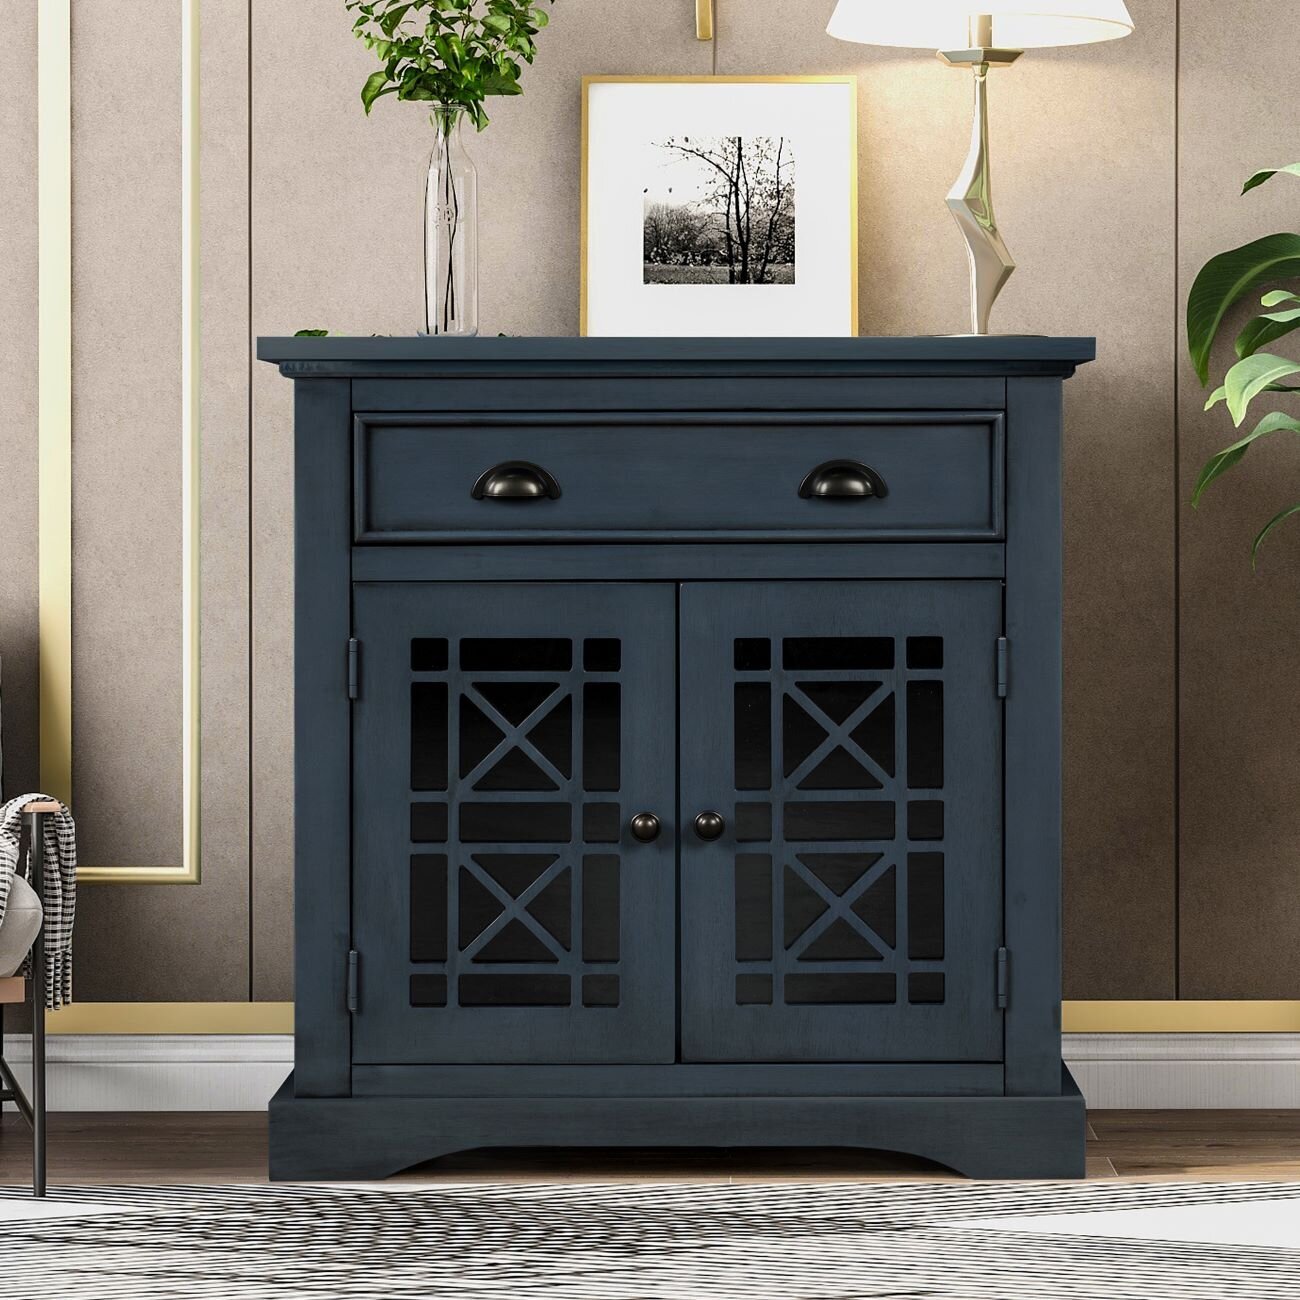 A navy cabinet with detailed, intricate, beautiful glass mosaic doors